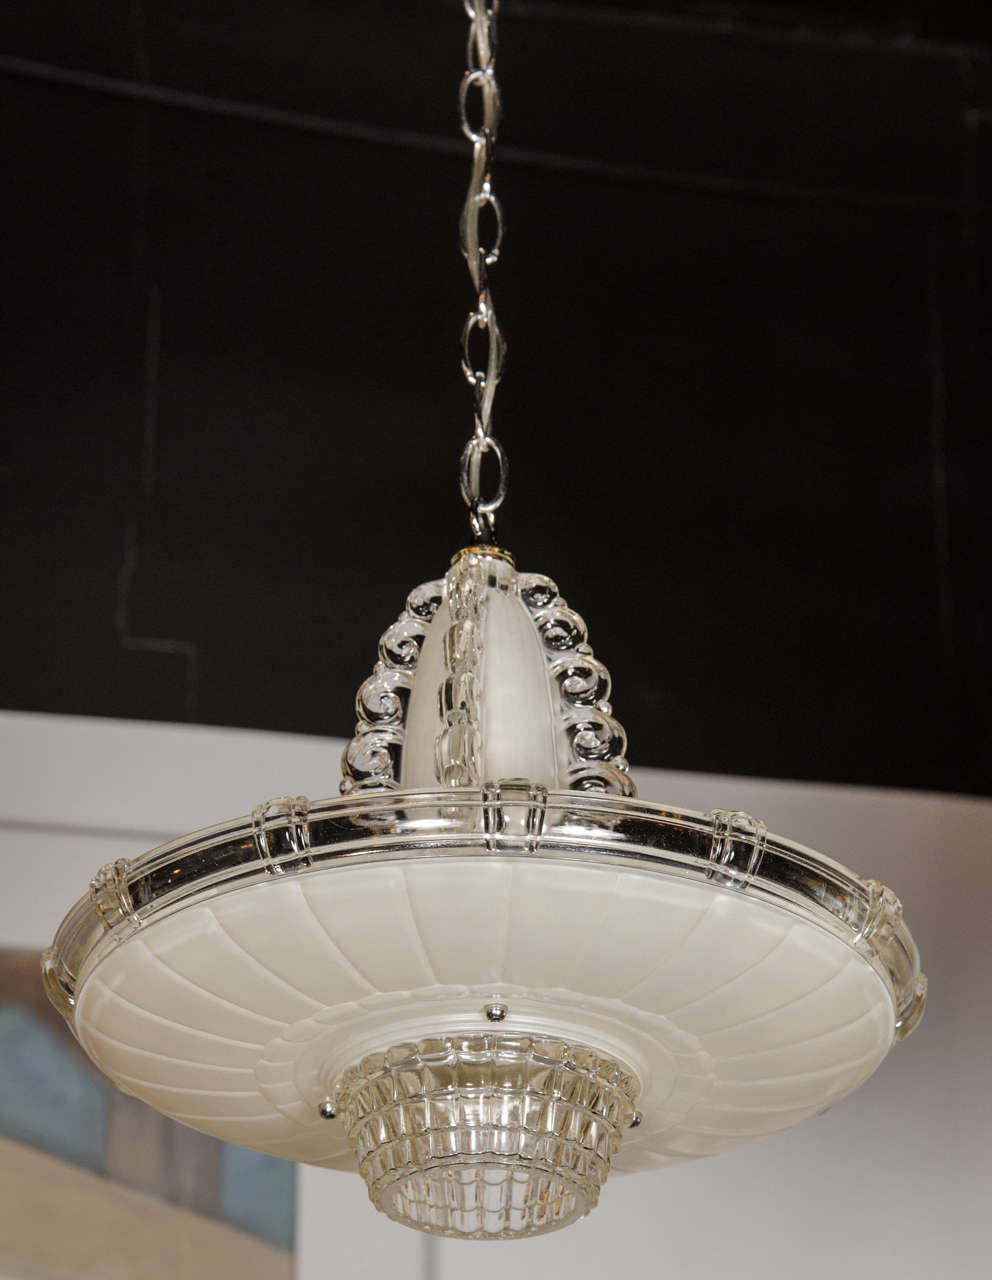 This elegant Art Deco chandelier by Lightolier features a fountain-like form, thick art glass with geometric designs and textures throughout the different sections. It has alternating frosted and clear colored glass which emanate a warm glow when